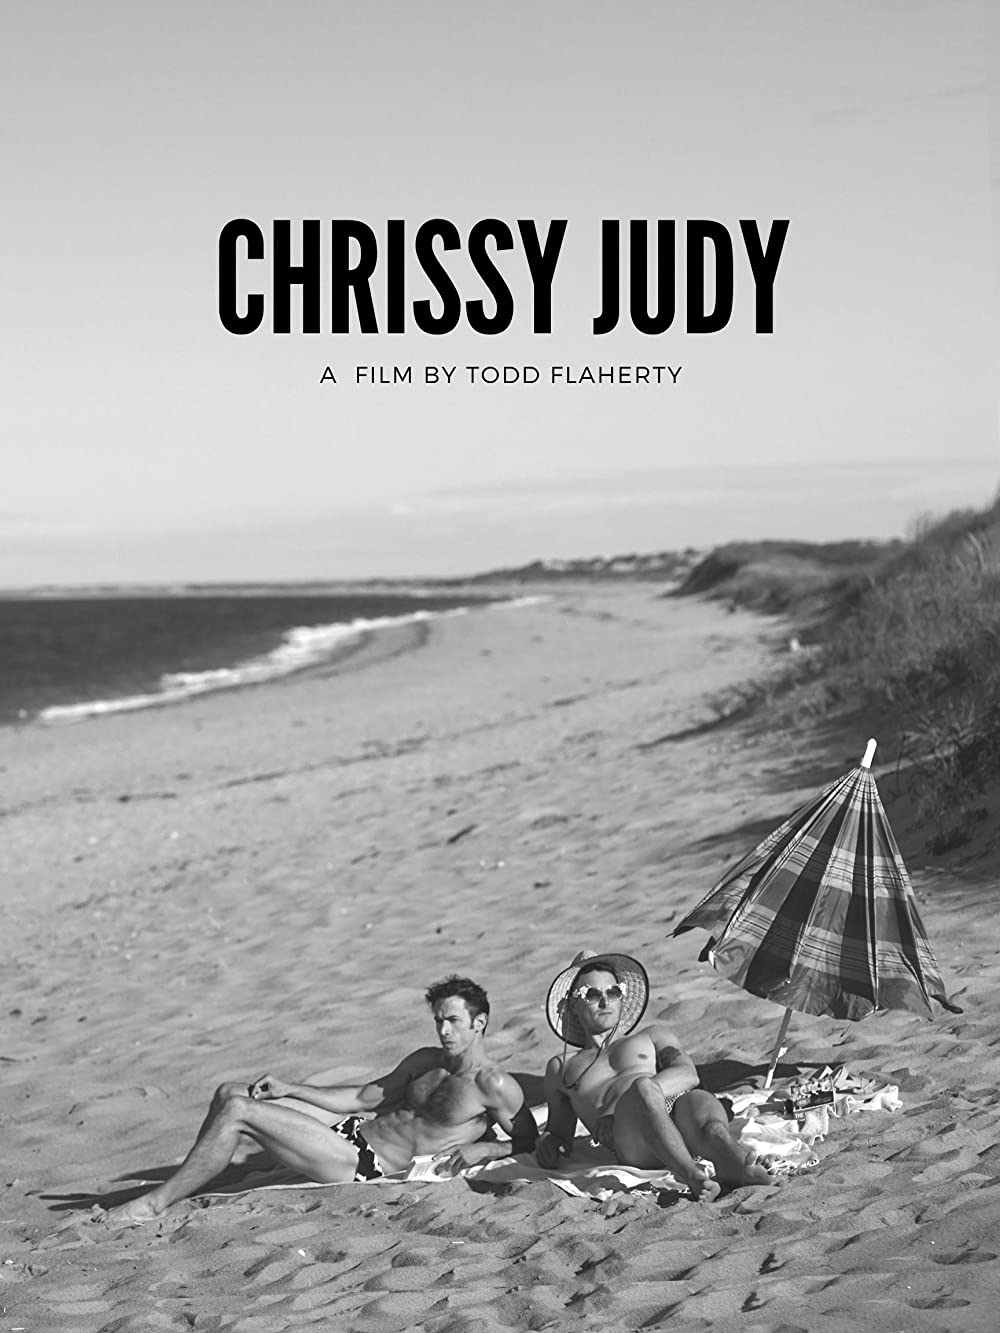 Nude Beach Strapon - Chrissy Judy: A Film Review - The Gay & Lesbian Review